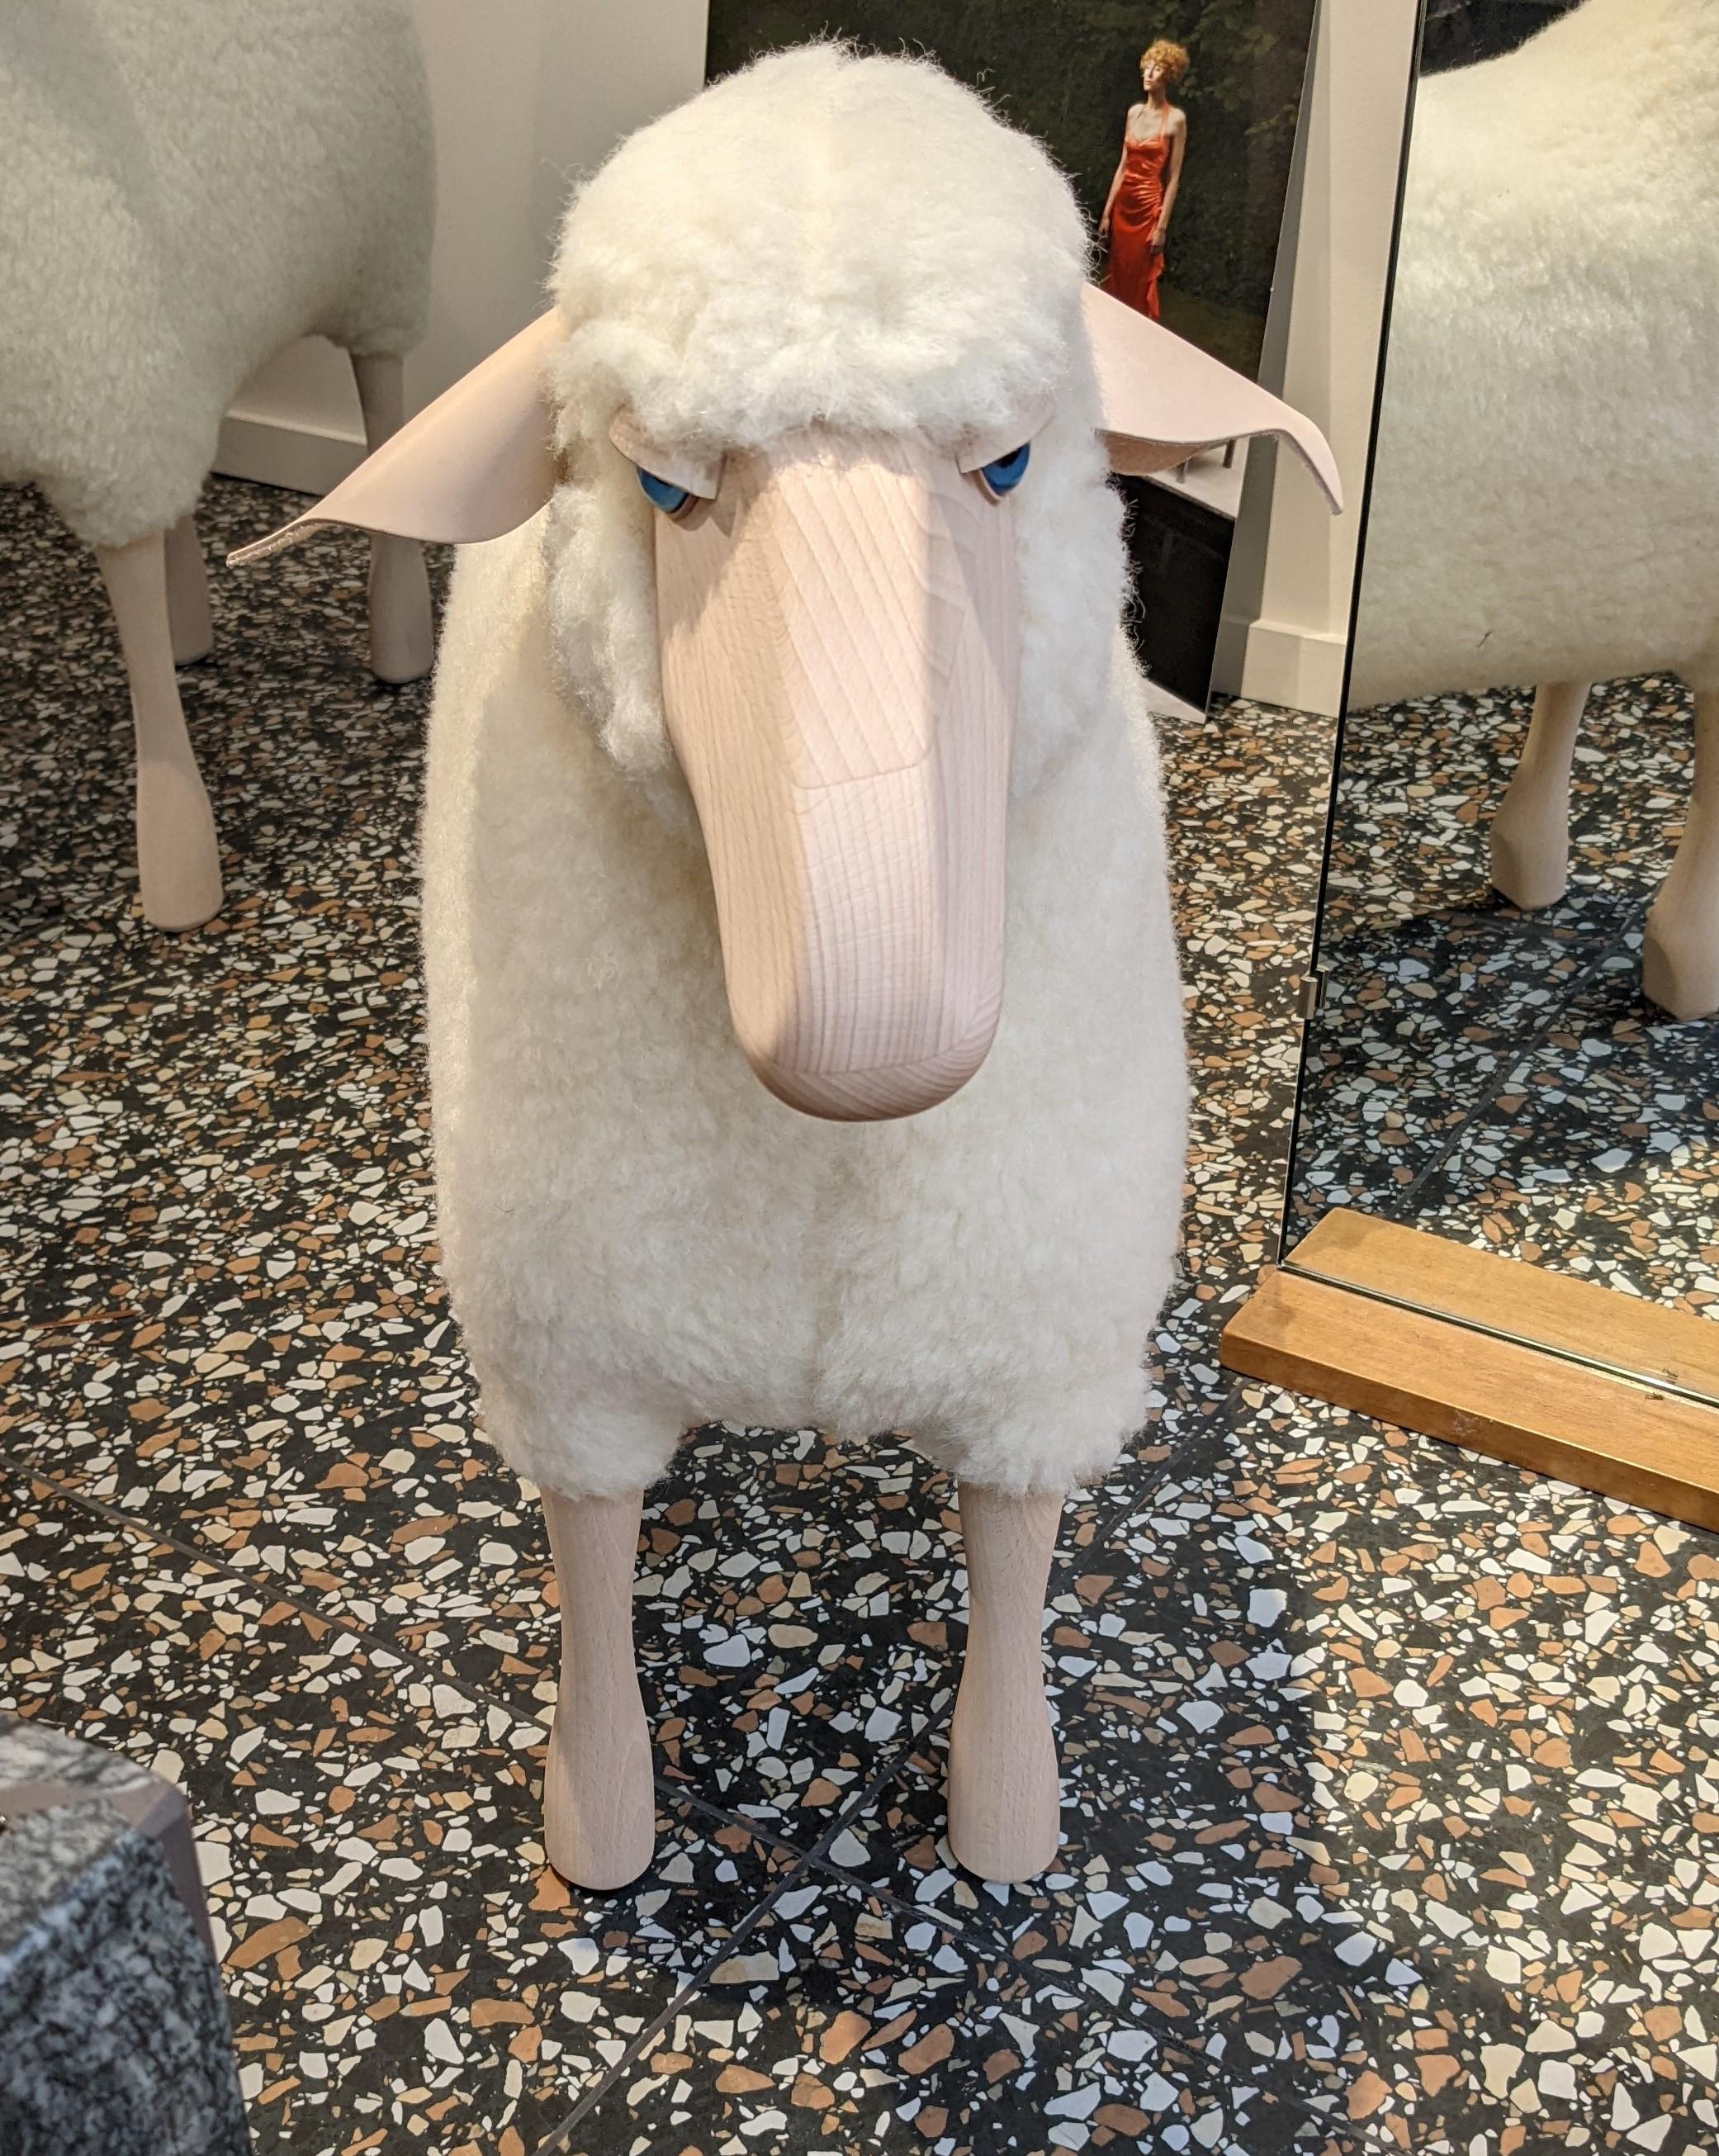 'Sheep' is a sculpture in the shape of a sheep created by Hans-Peter Krafft in the 1960s and handcrafted by Meier in Germany.

This sheep is designed as a piece of furniture and is strong enough to be used as a stool by adults and